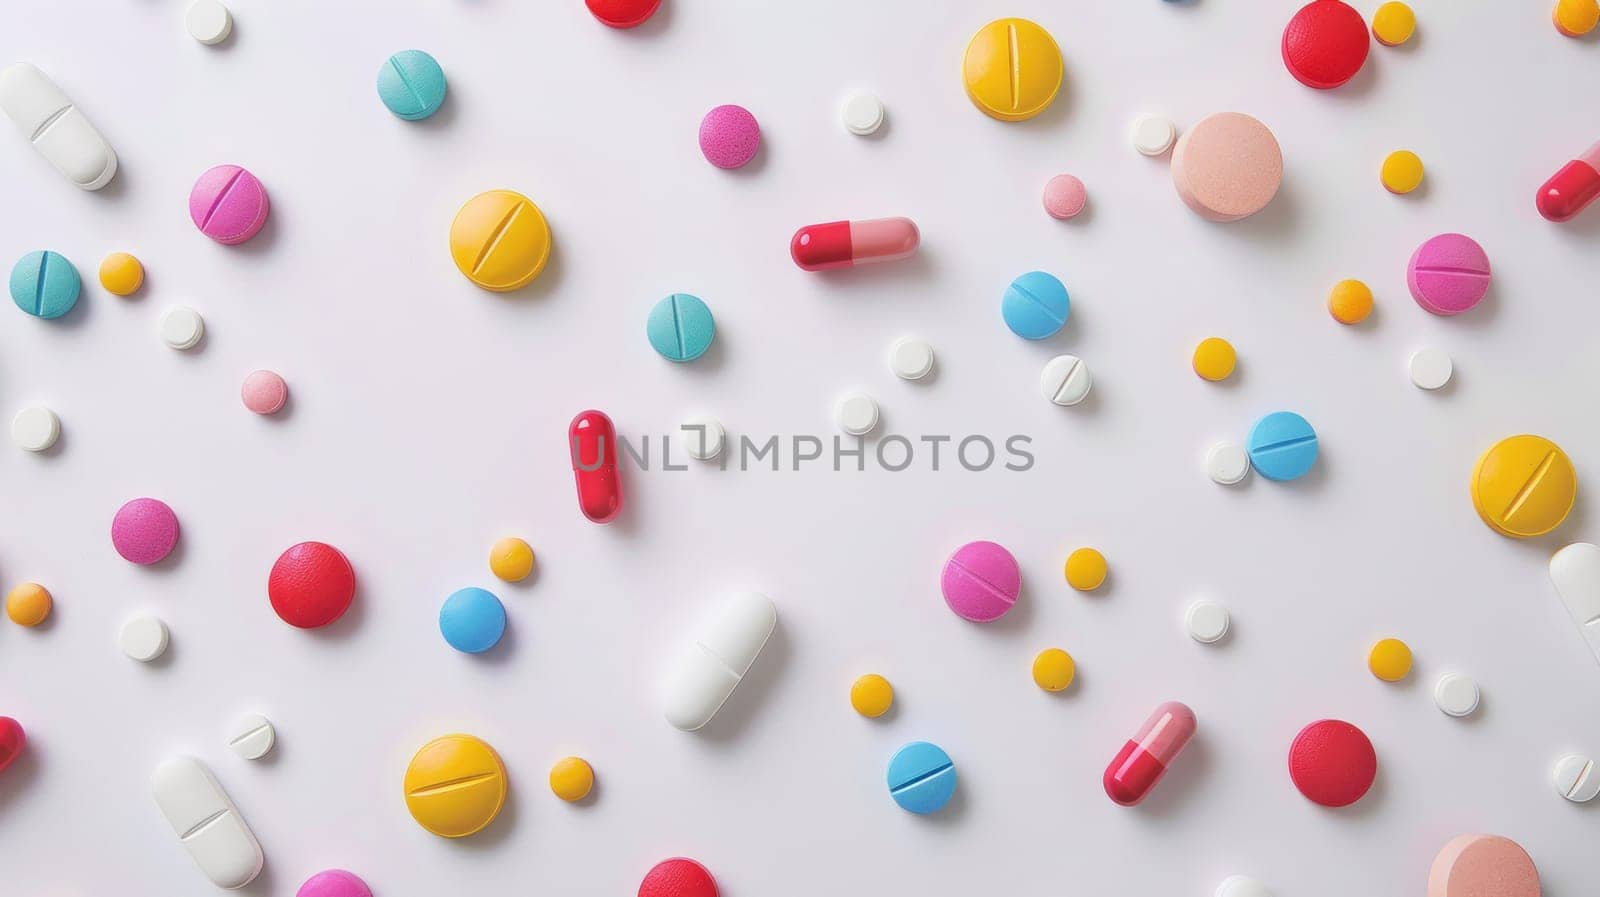 Colorful medication and pills on white surface with space for text and image for medical concept